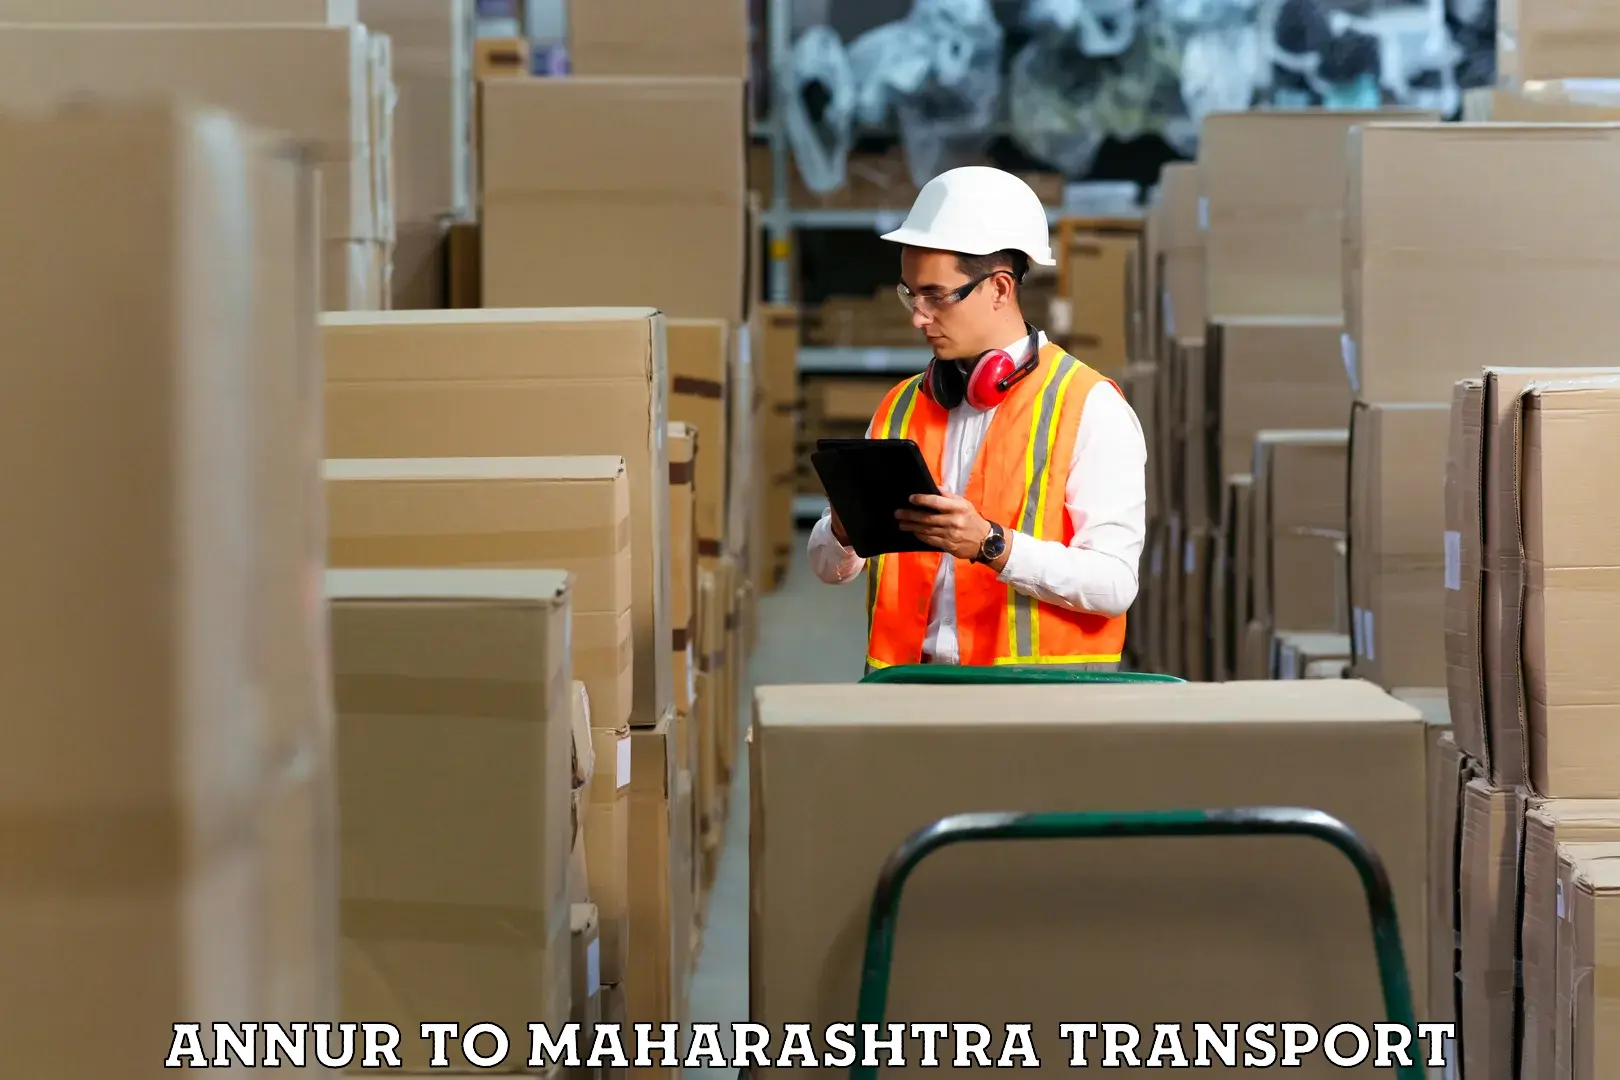 Truck transport companies in India Annur to Maharashtra